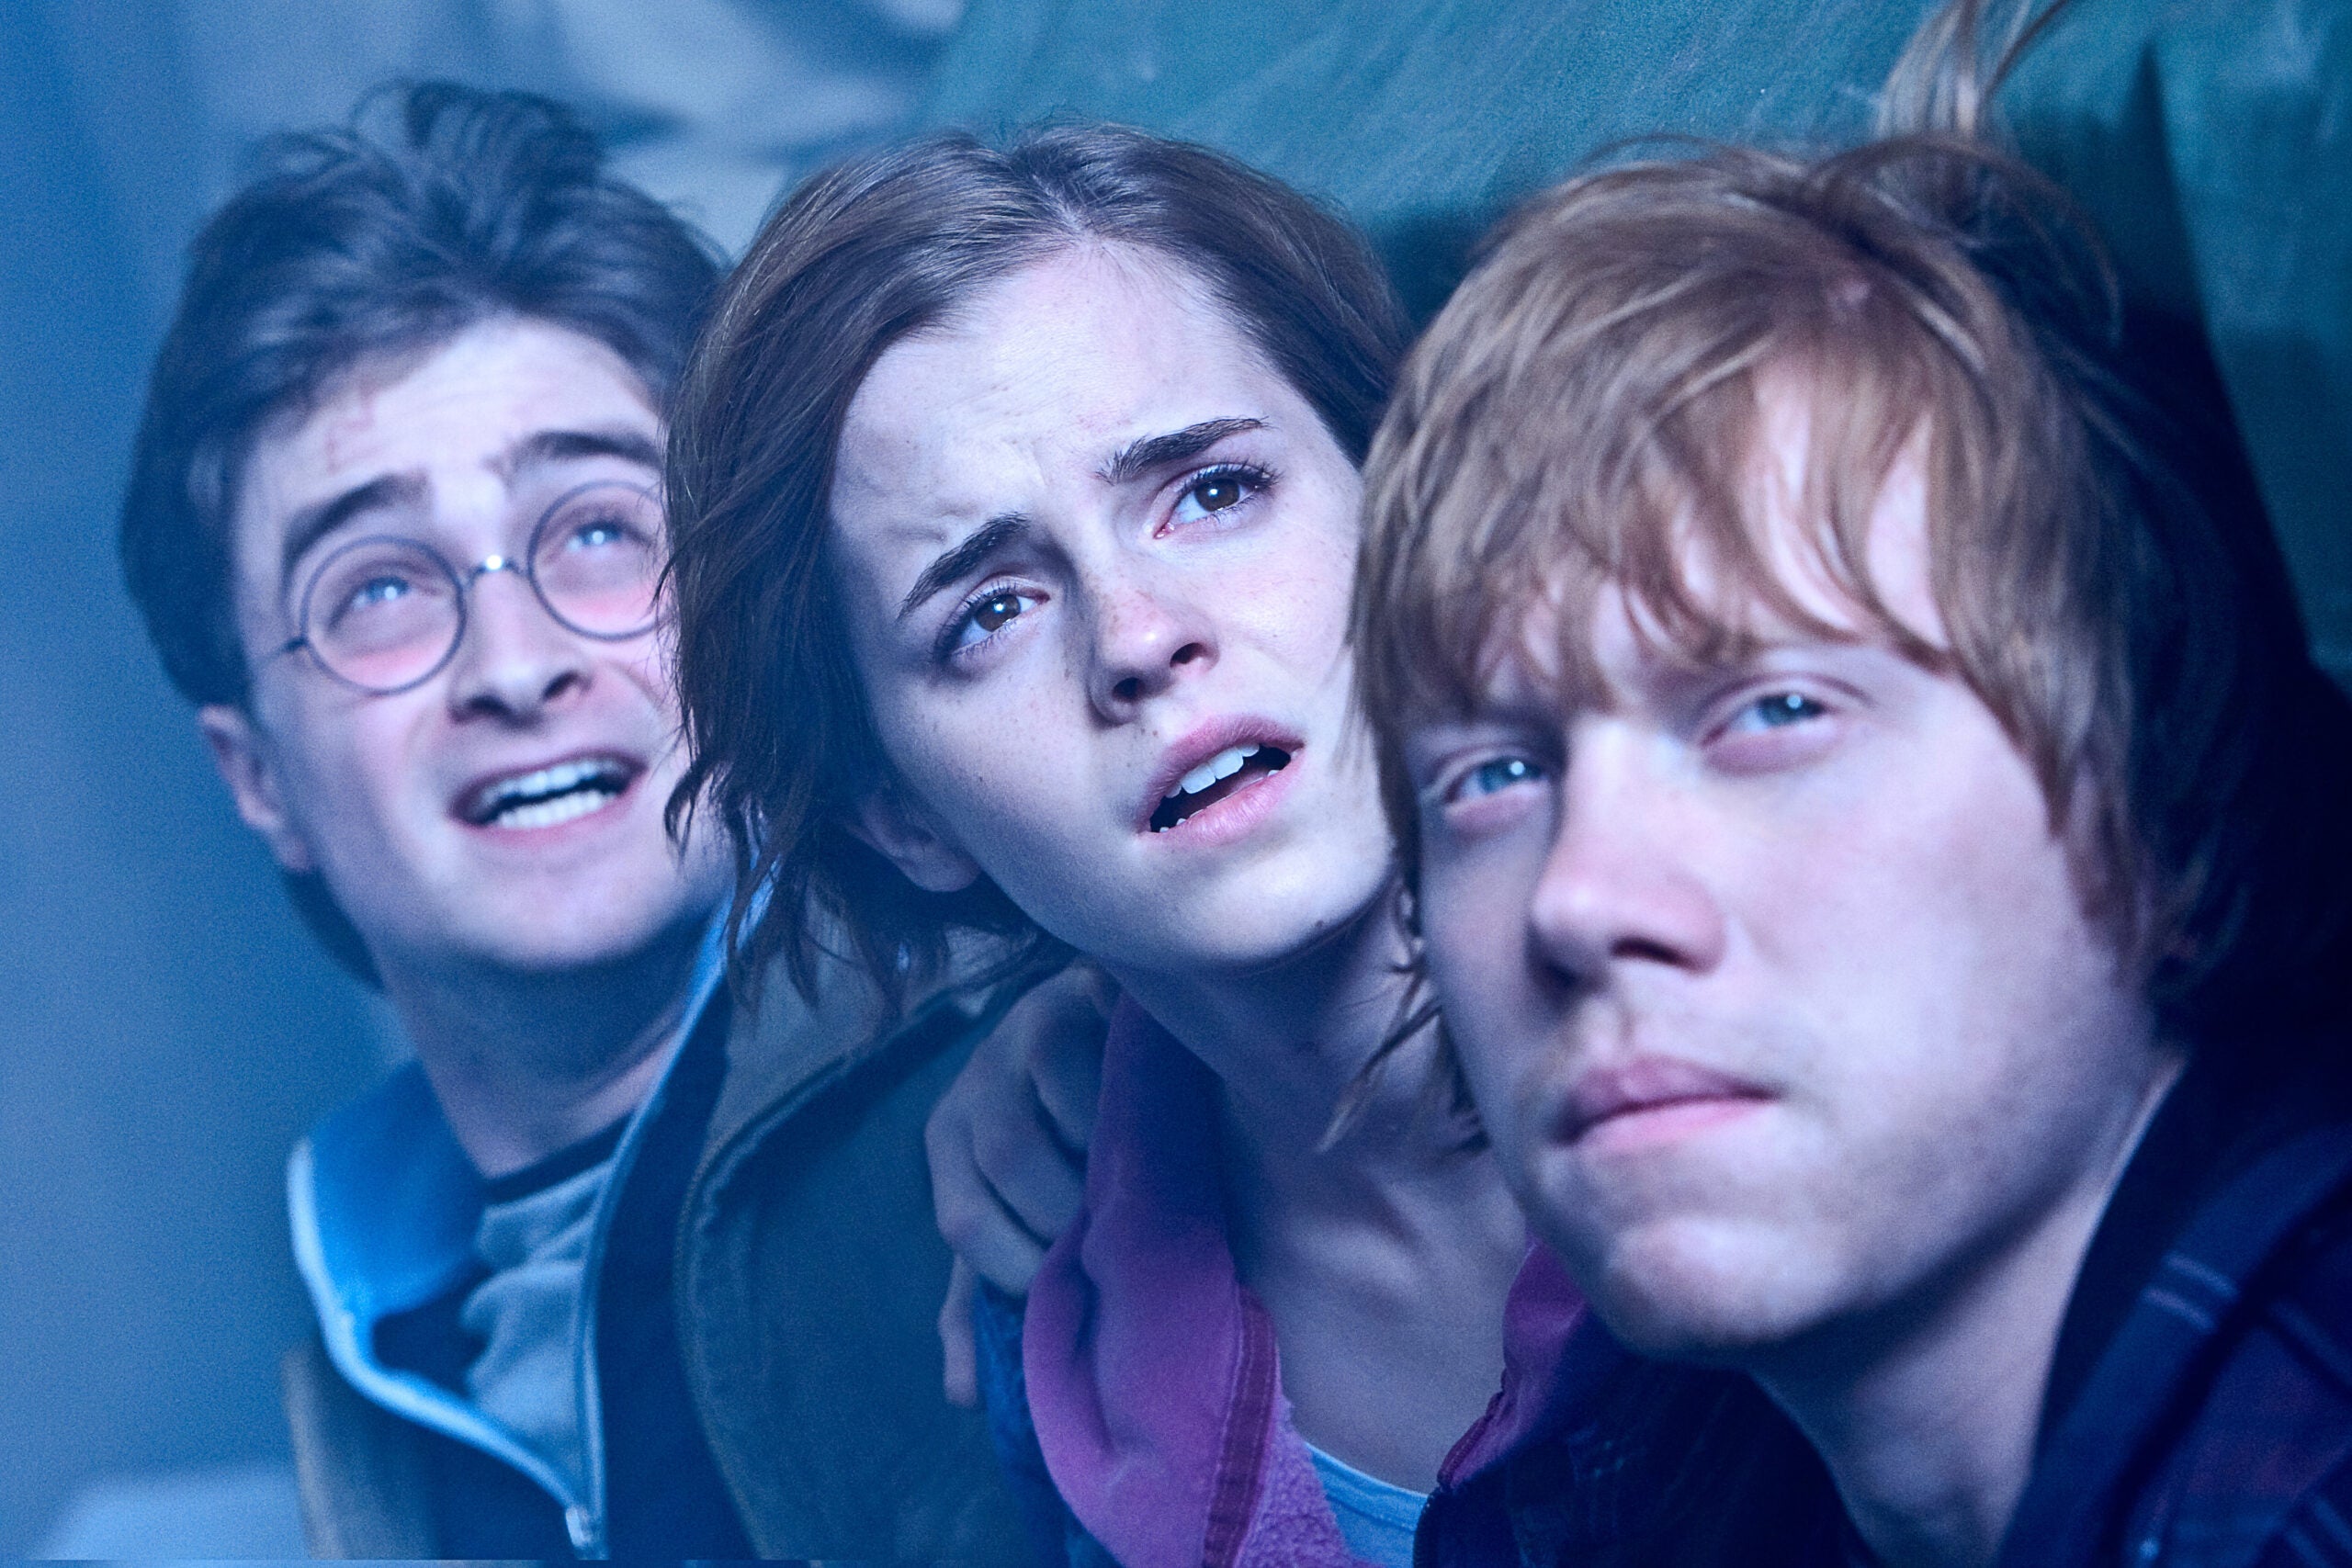 Hermione granger, ron weasley and harry potter on Craiyon, hermione granger  